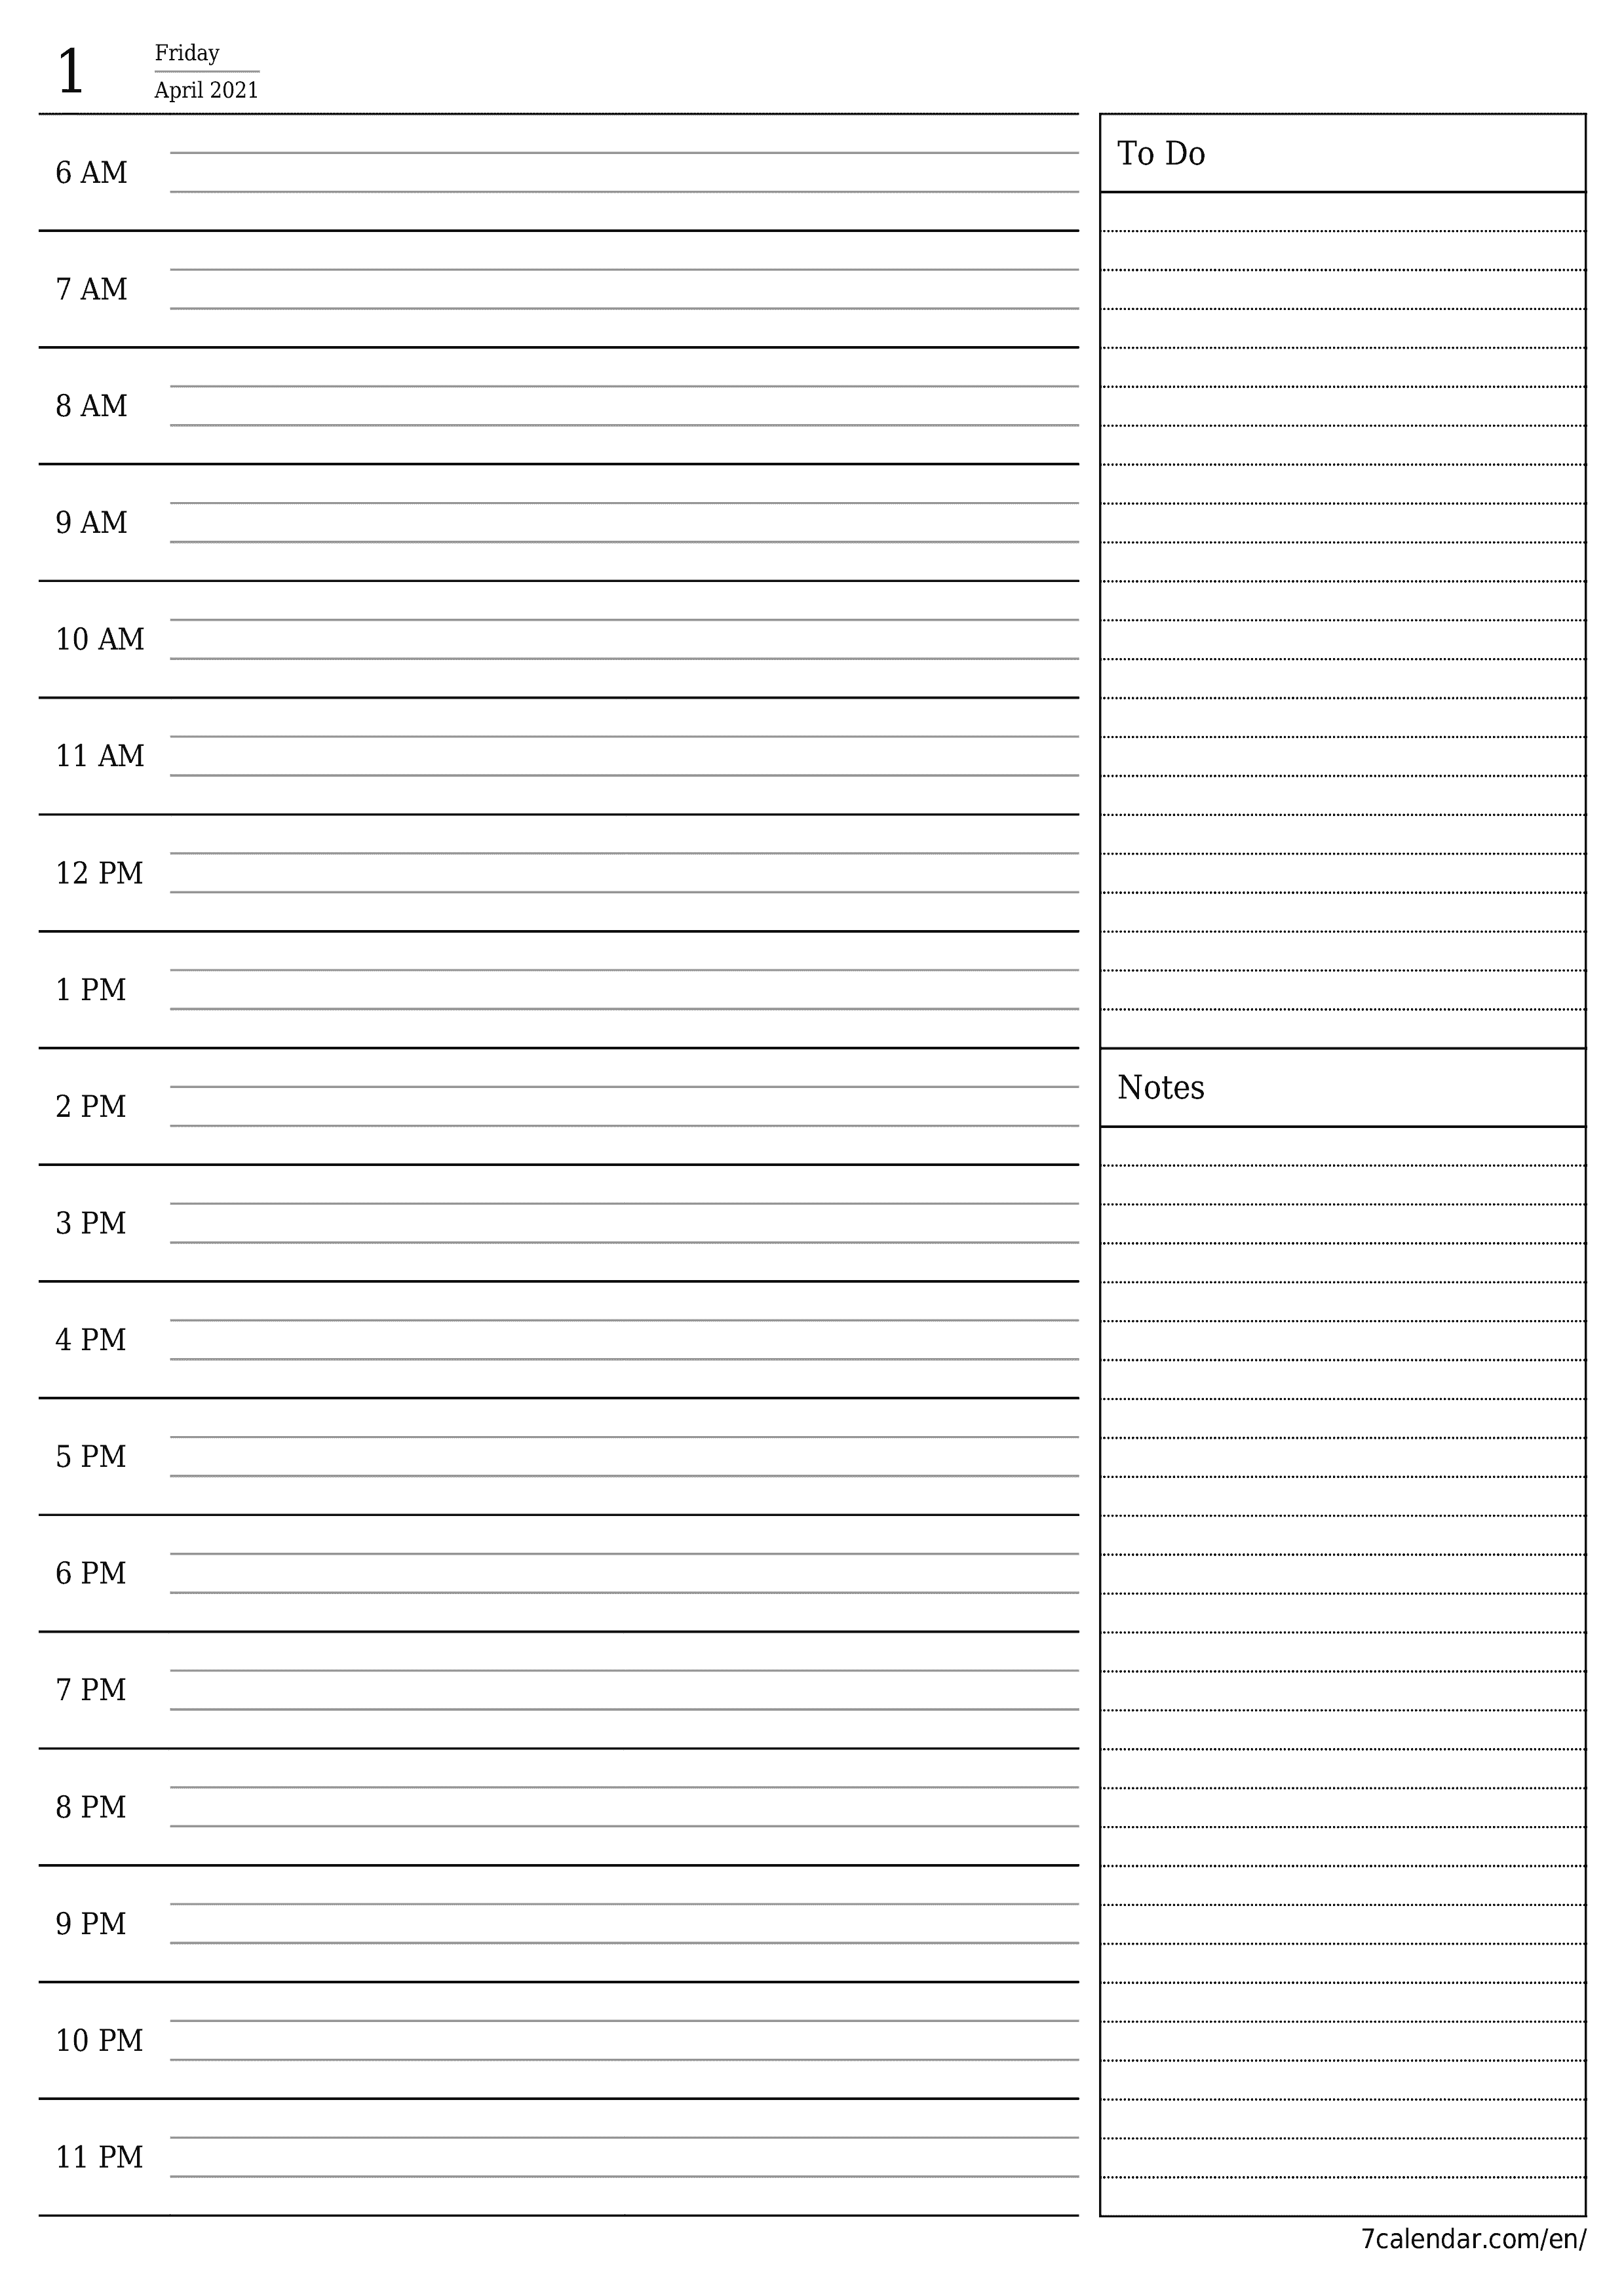 Blank daily printable calendar and planner for day April 2021 with notes, save and print to PDF PNG English